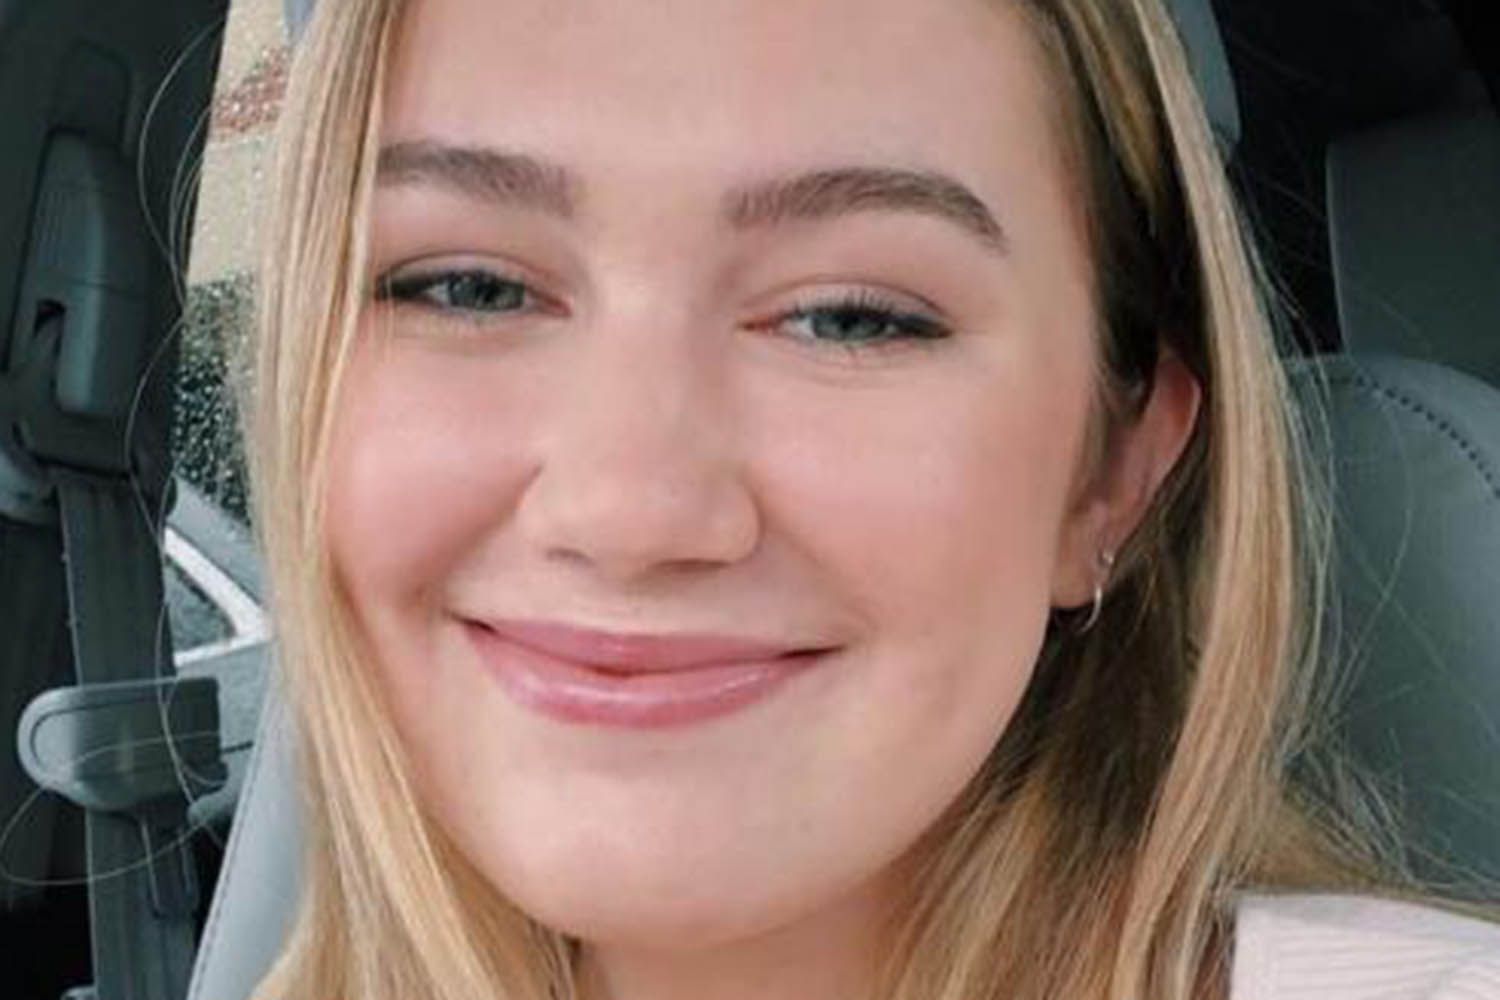 Calif. Student Who Went Missing at LAX Has Made Contact, Say Parents [Video]